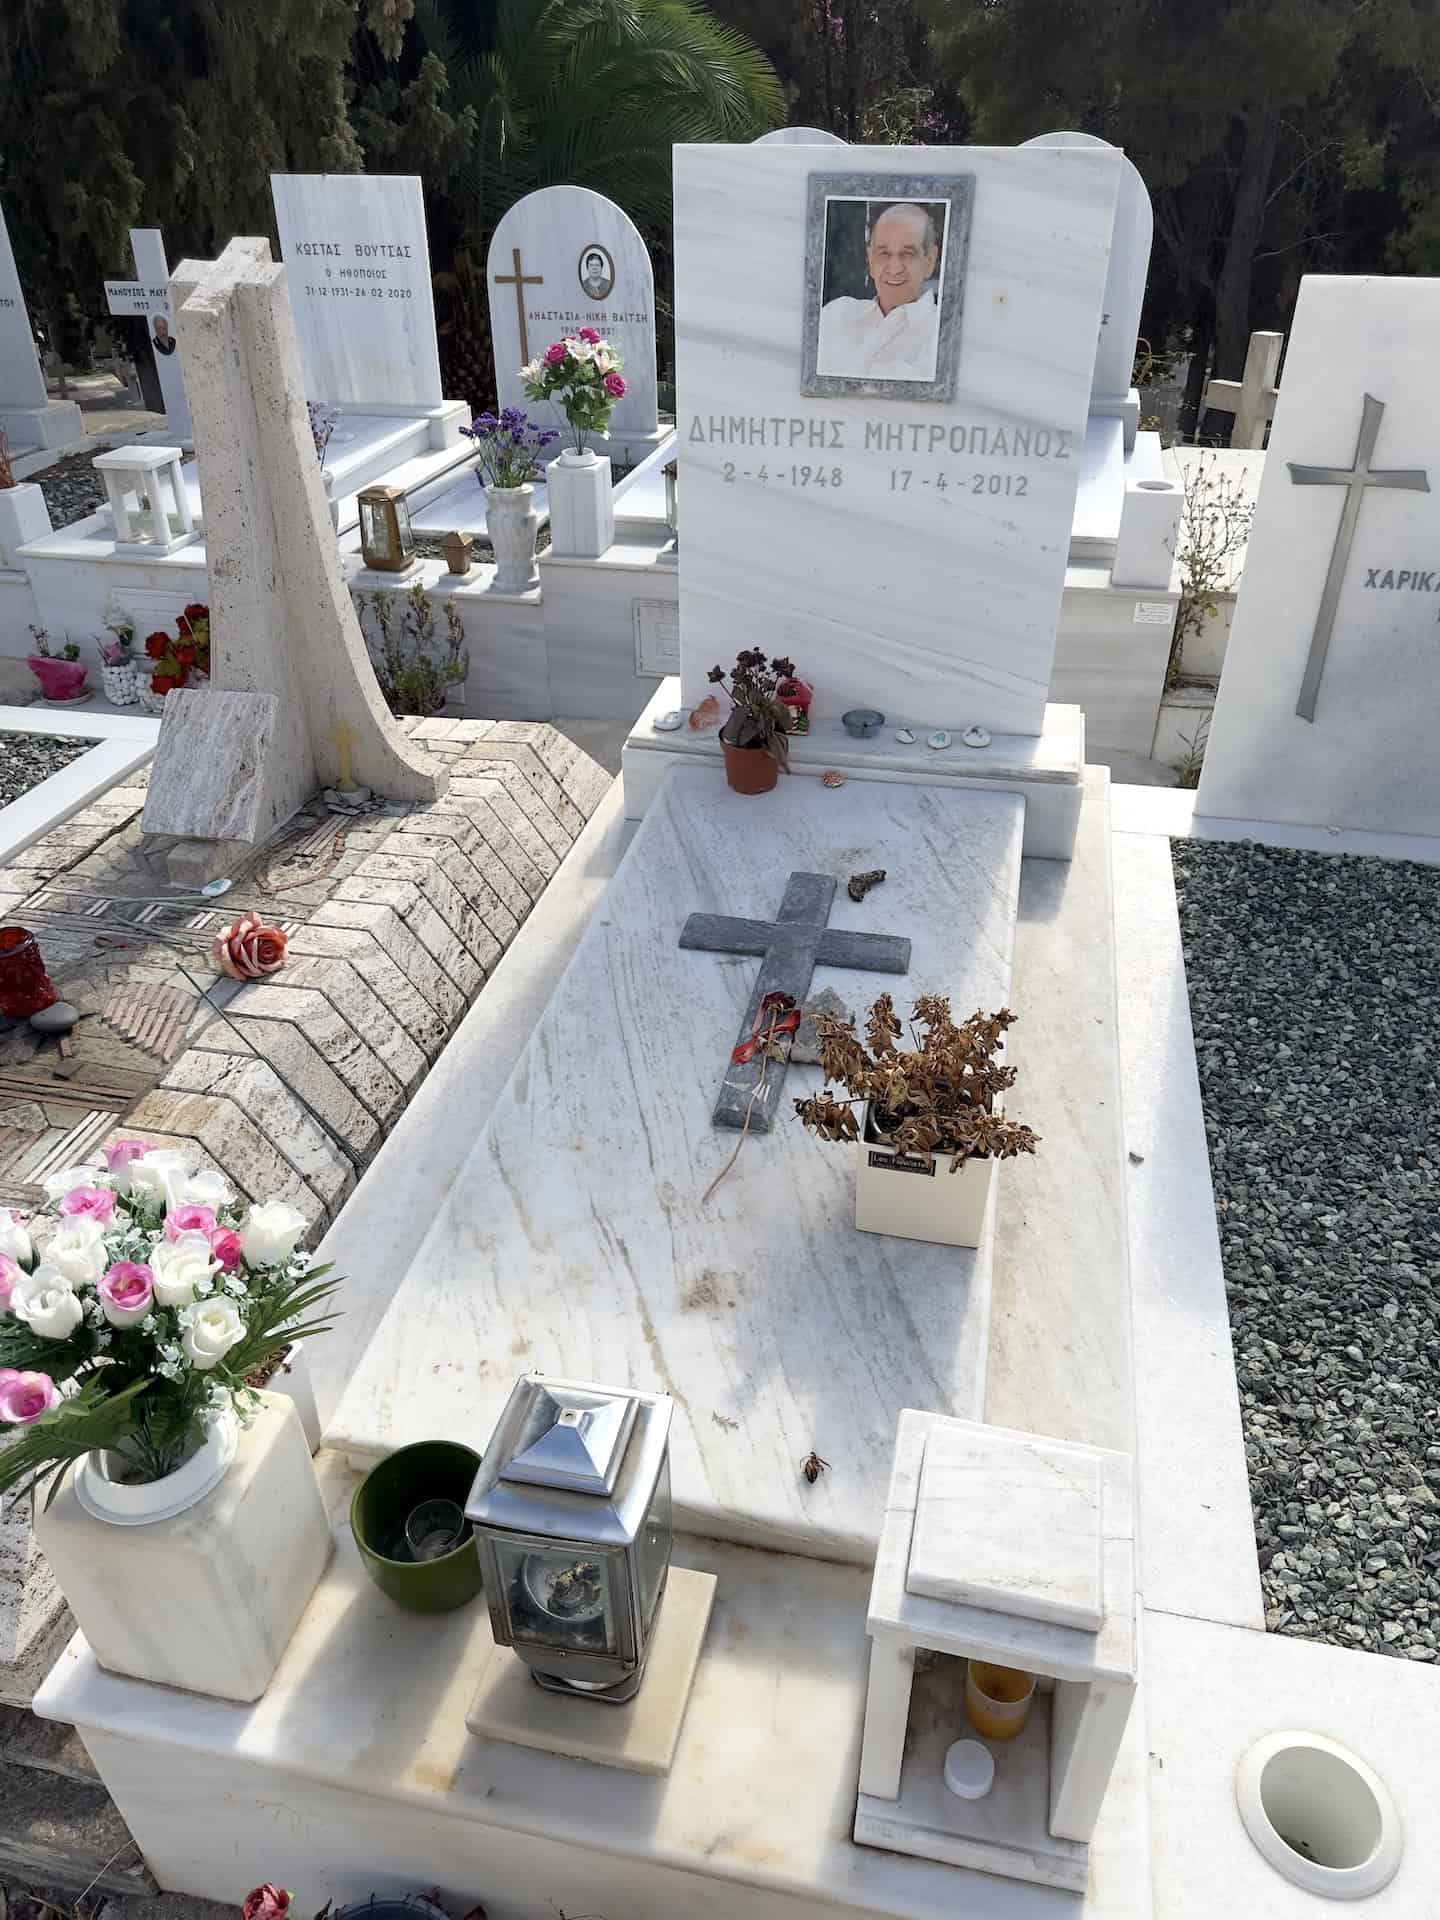 Dimitris Mitropanos at the First Cemetery of Athens, Greece